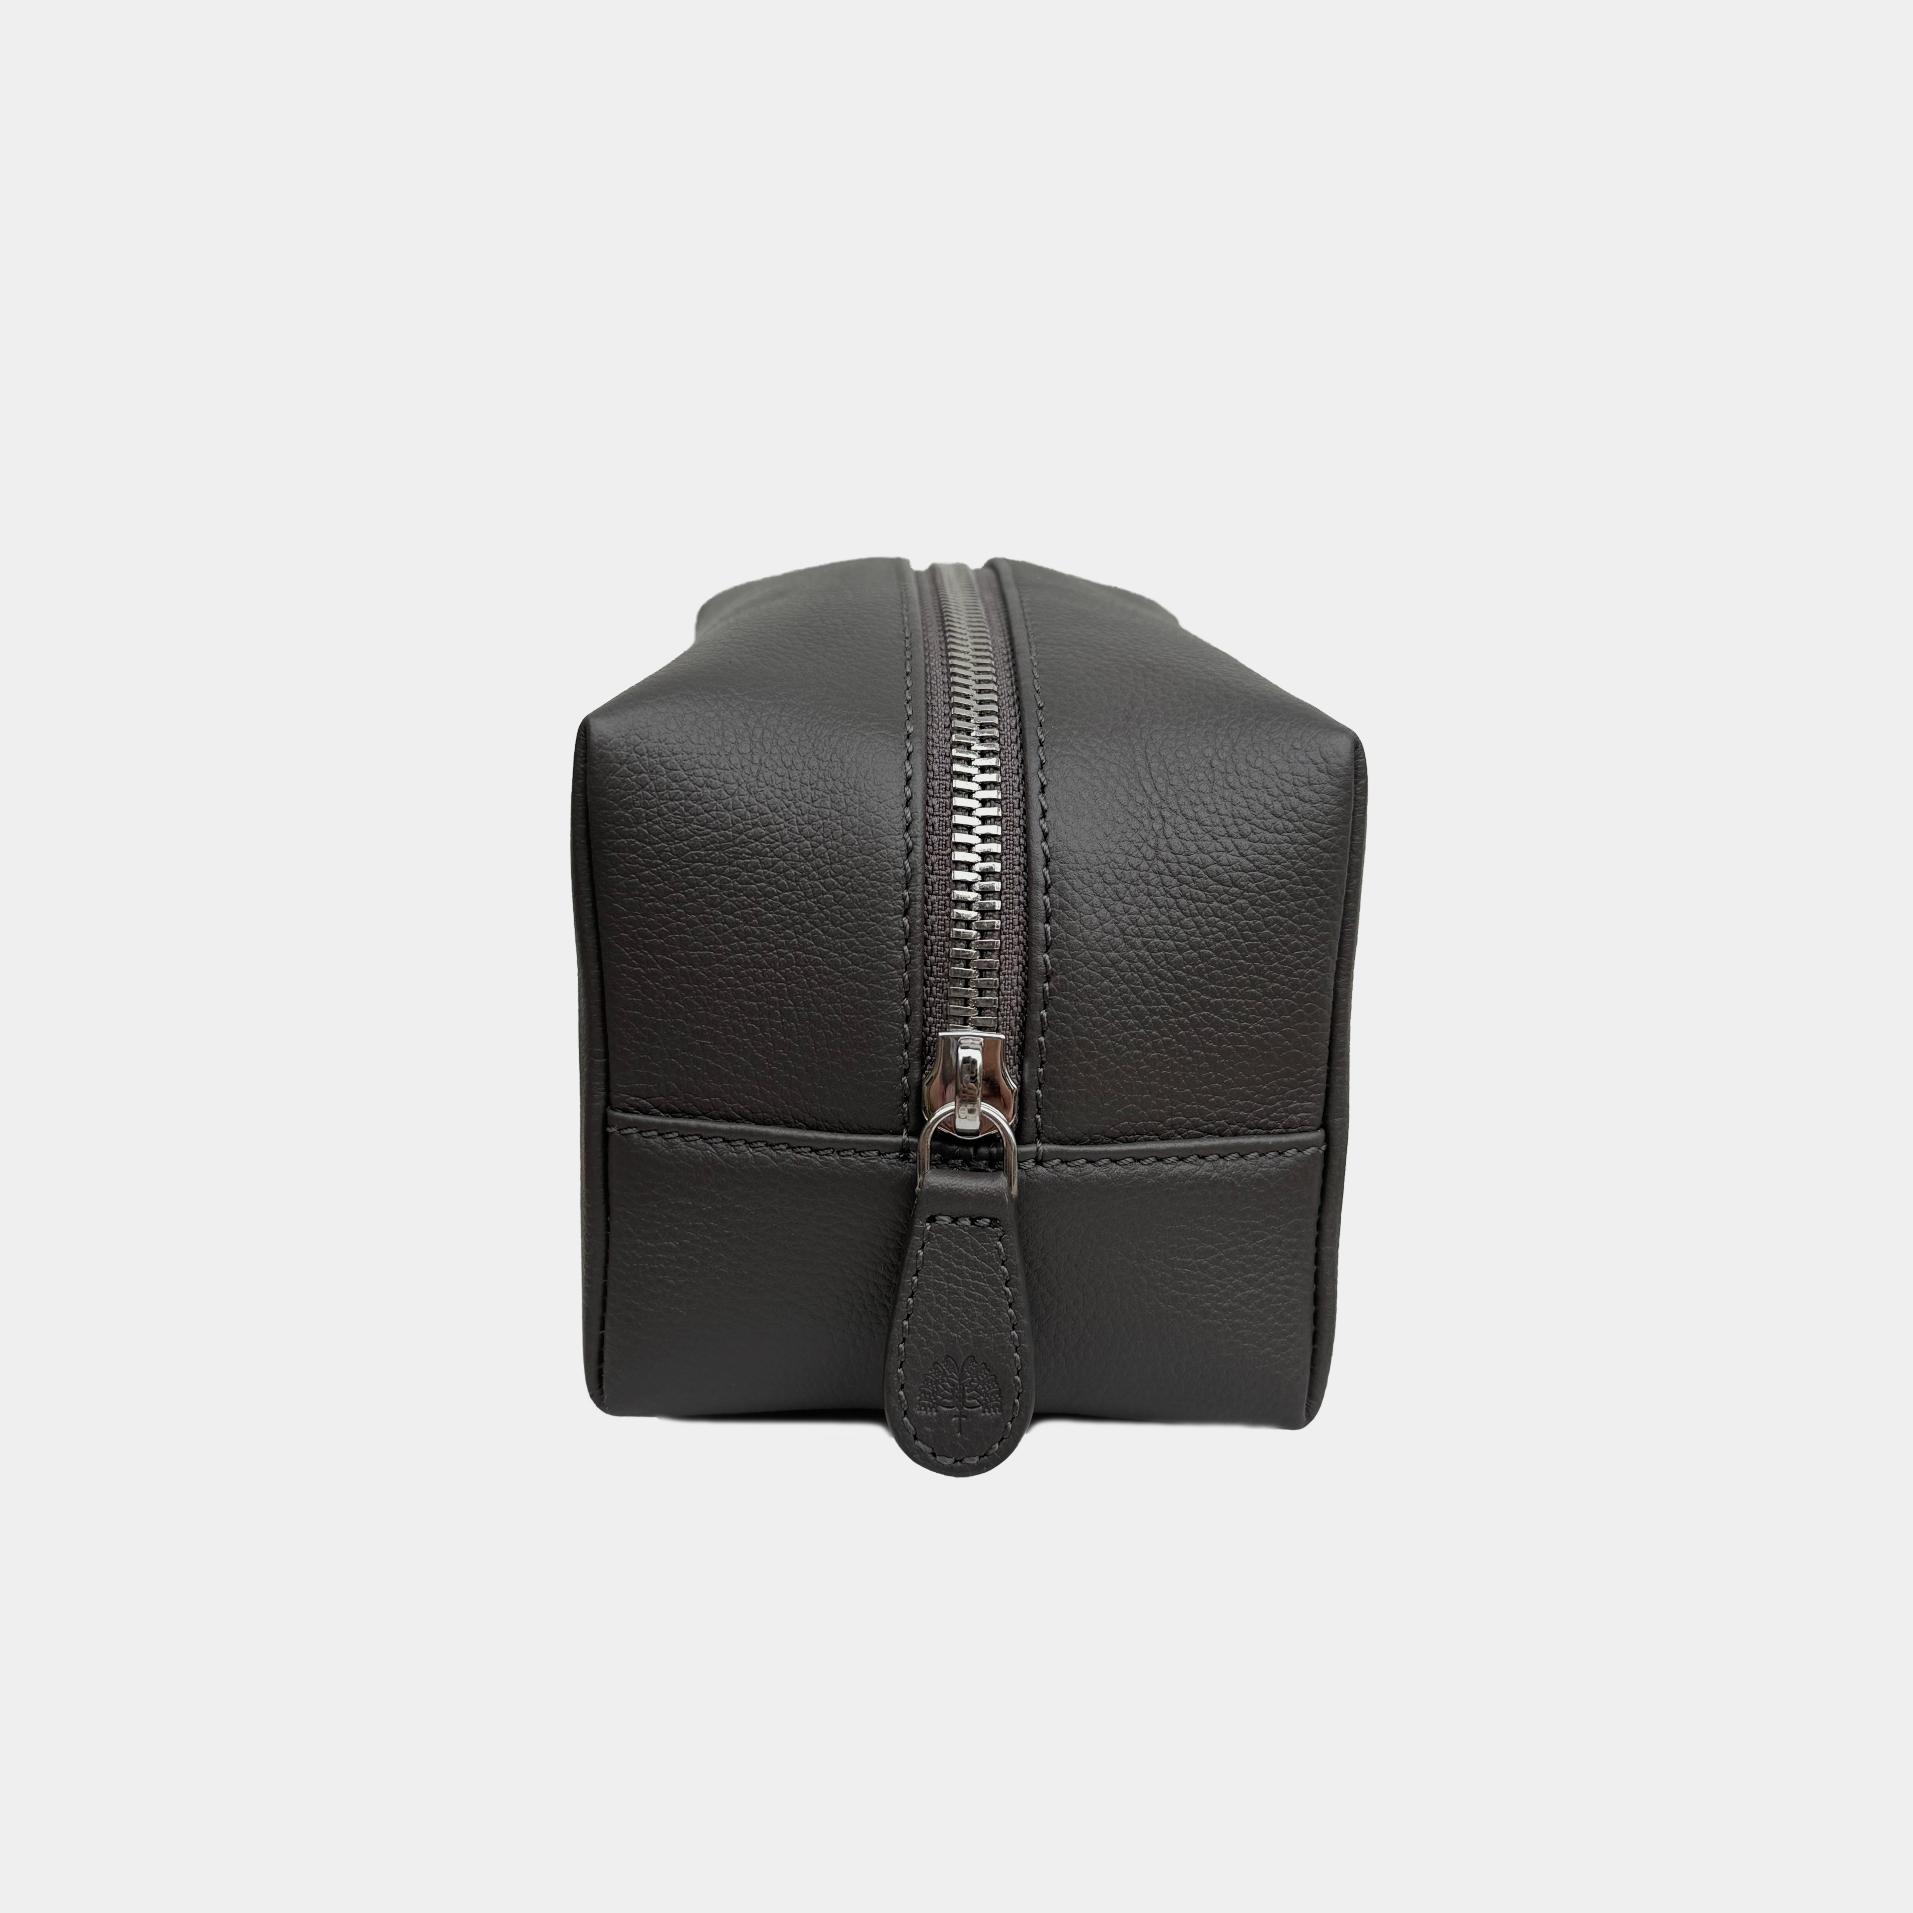 Medium leather wash bag designed for travelling, embossed with your company logo for corporate gifting.